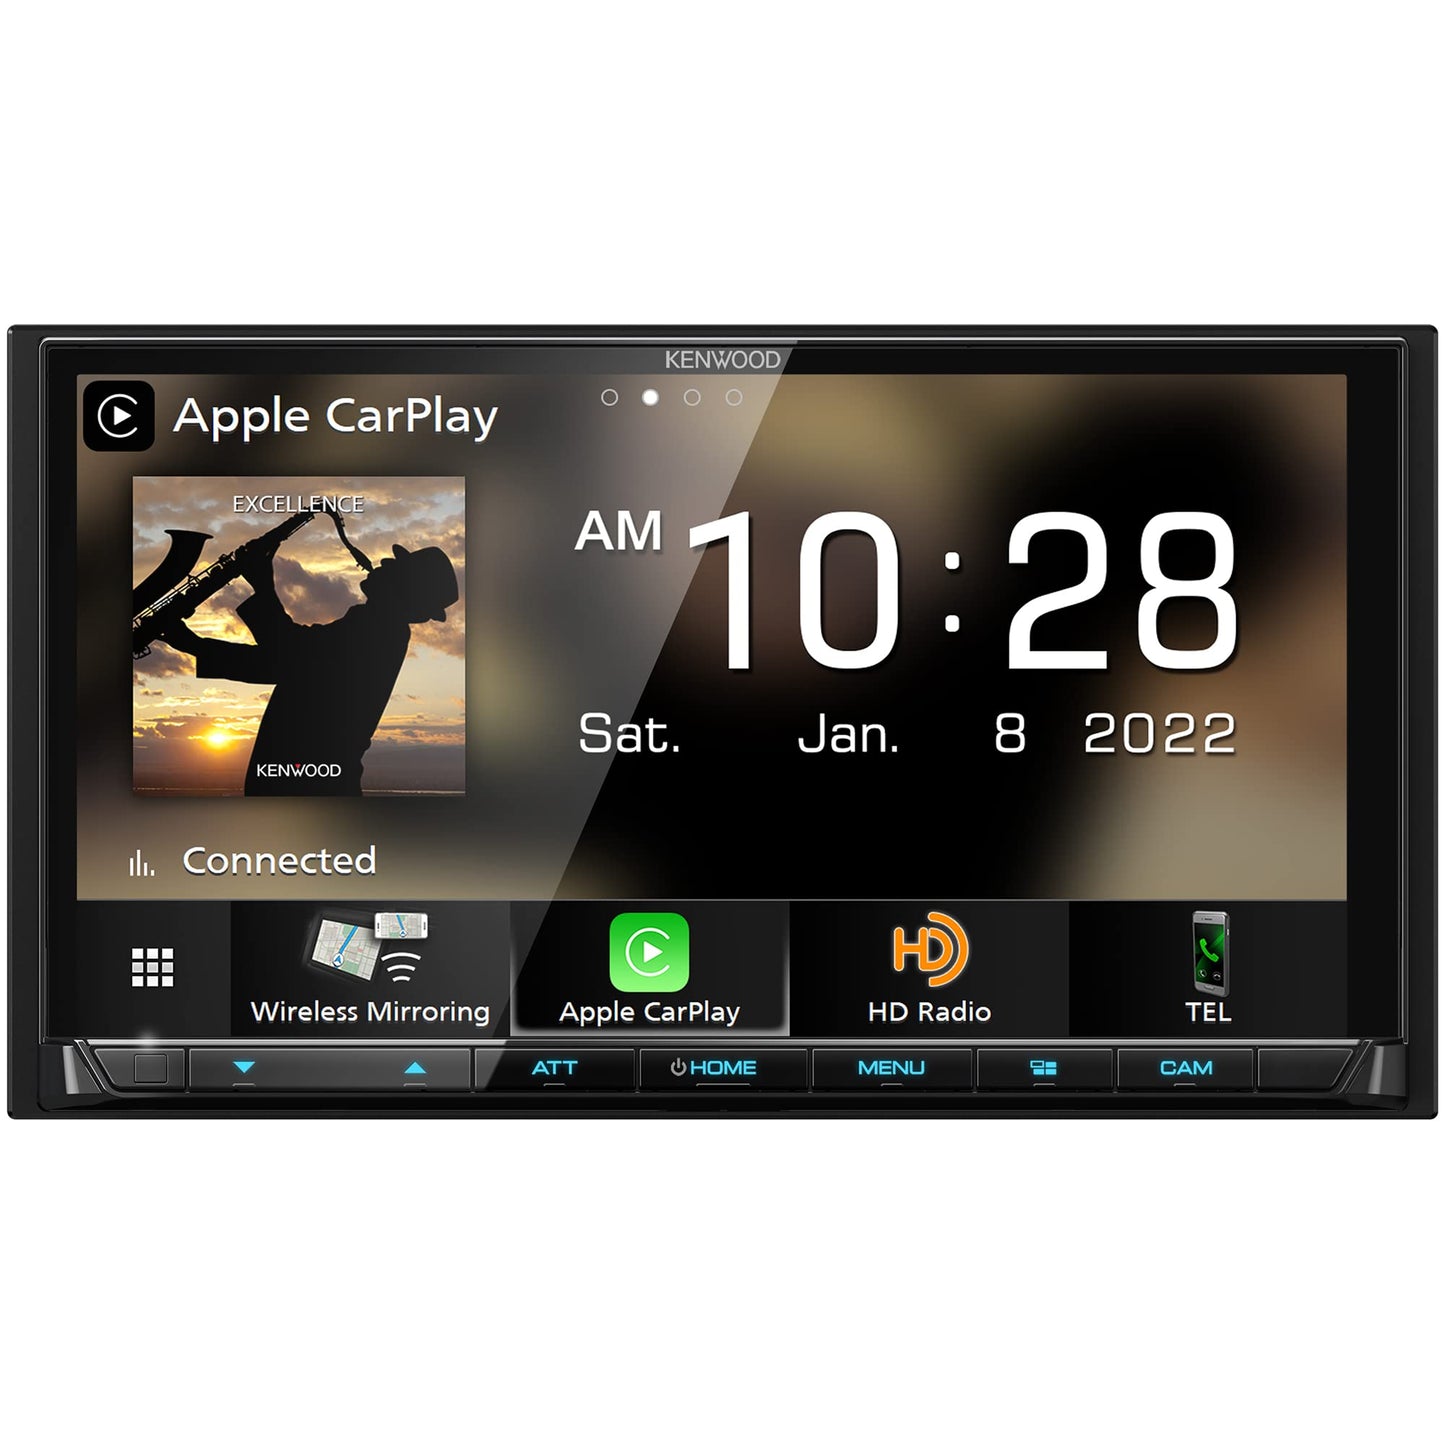 Kenwood DMX908S AM FM HD WiFi HDMI Car Stereo- Wireless Apple CarPlay, Android Auto, Maestro Compatible